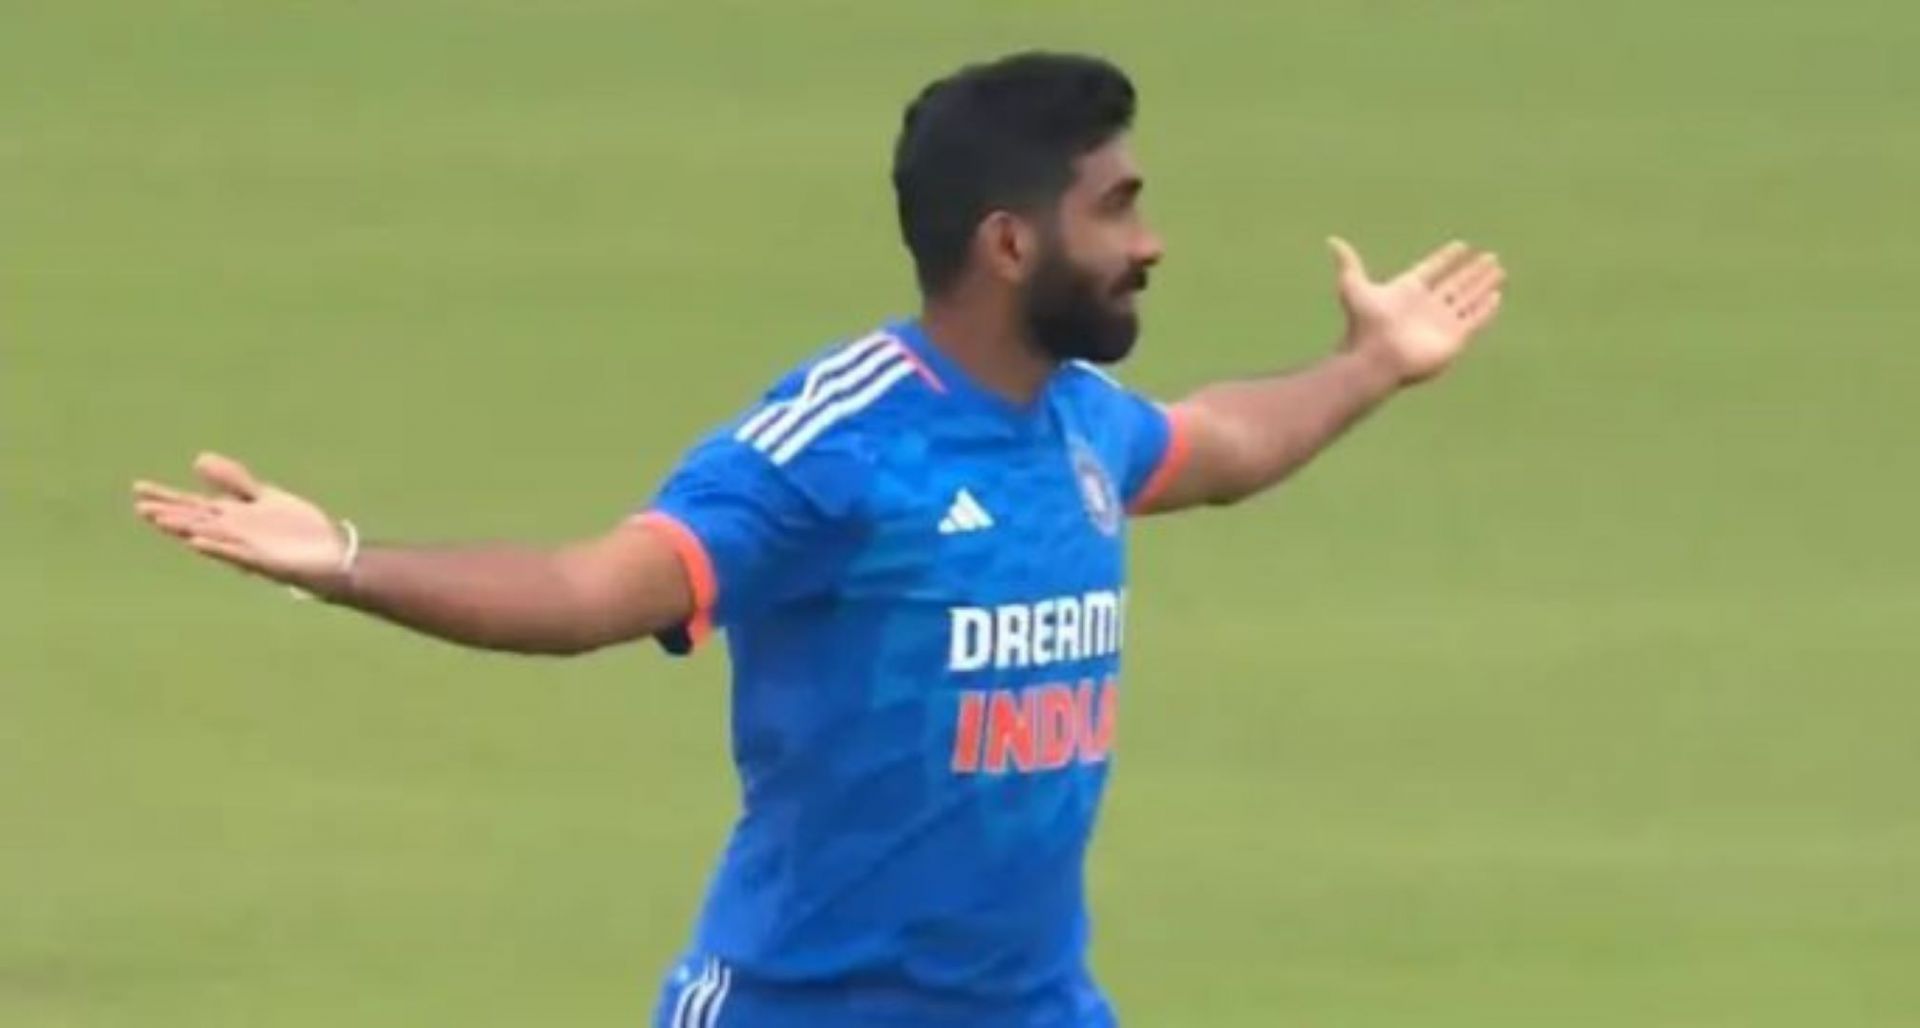 Bumrah had another sensational outing with the ball in the second T20I